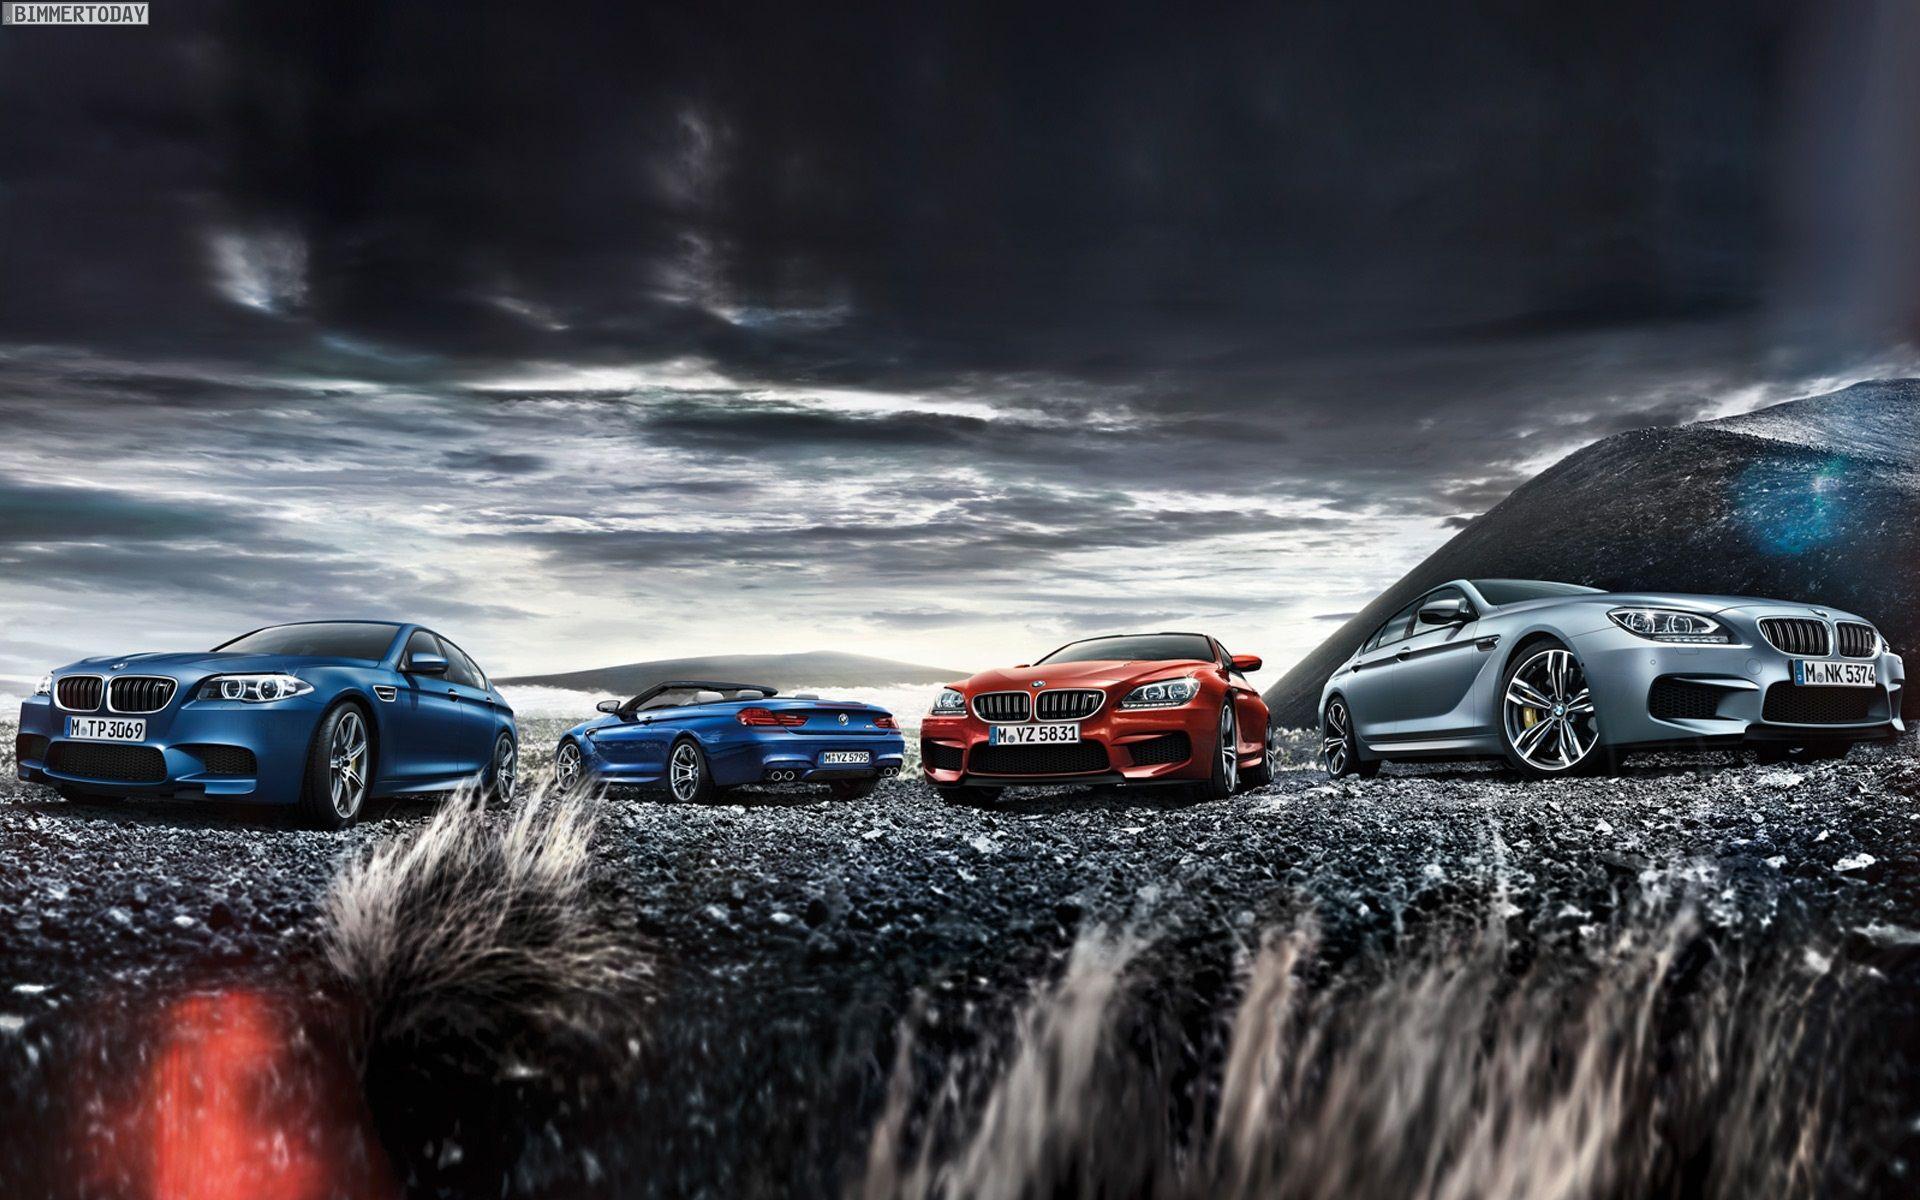 BMW M sold 282 cars in 2013 percent increase